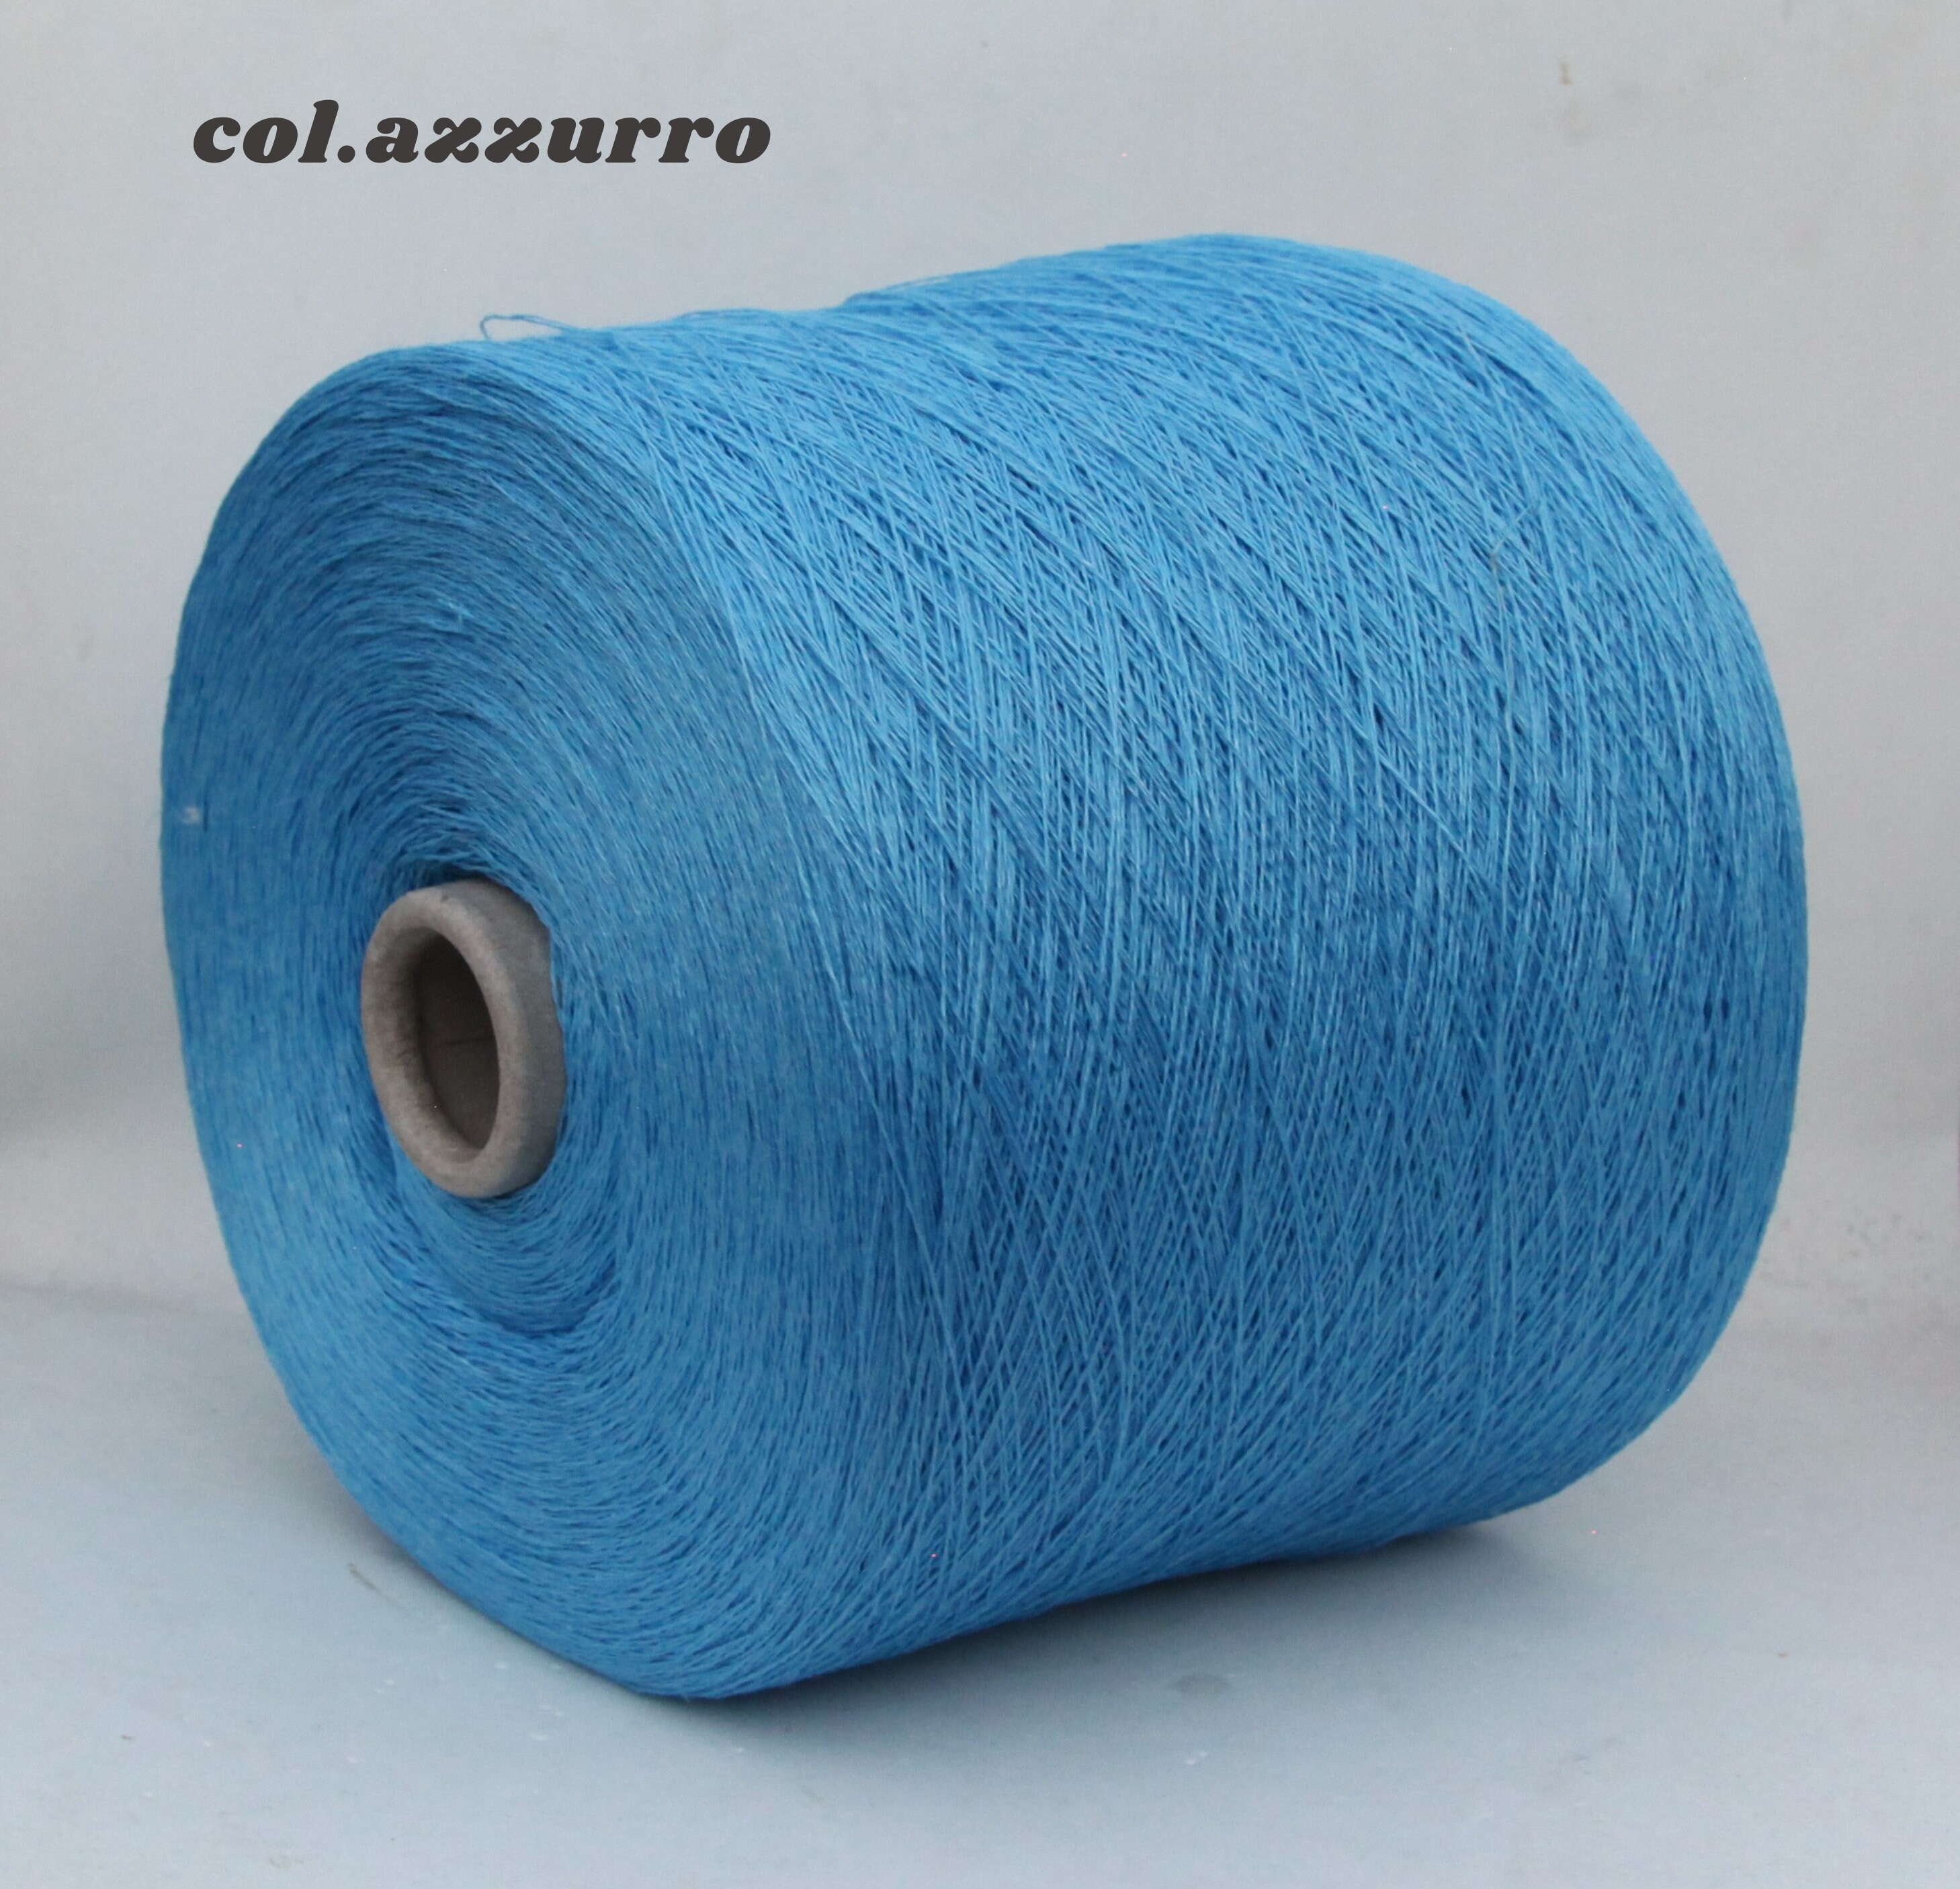 Silk/linen variegated yarn on cone, lace weight yarn for knitting, weaving  and crochet, per 100g